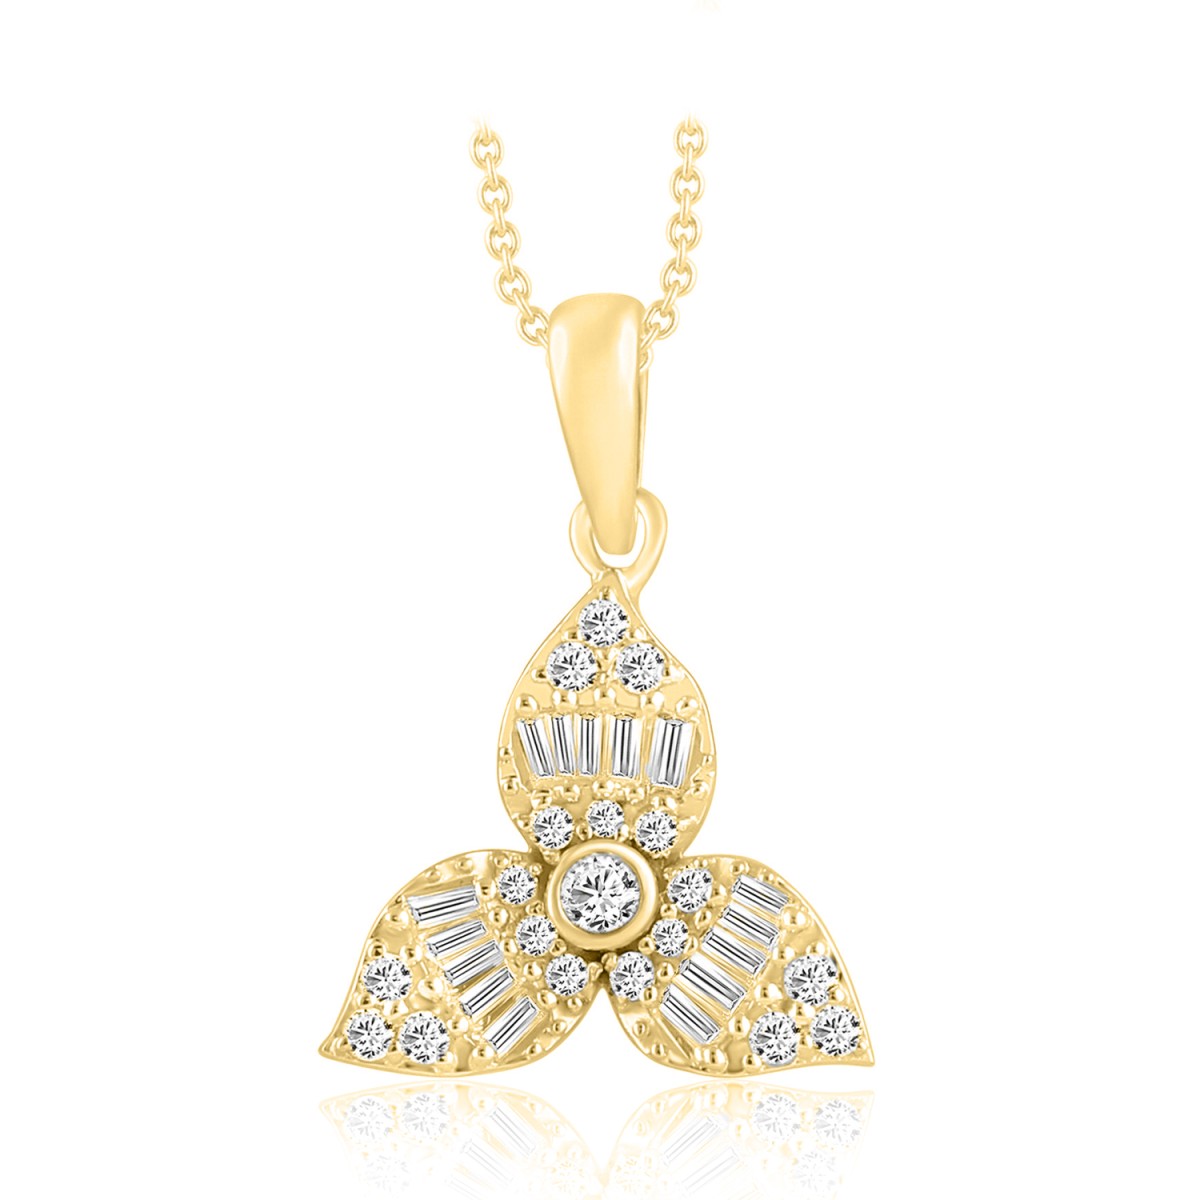 14K YELLOW GOLD 1/4CT ROUND/BAGUETTE DIAMOND LADIES PENDANT WITH CHAIN 